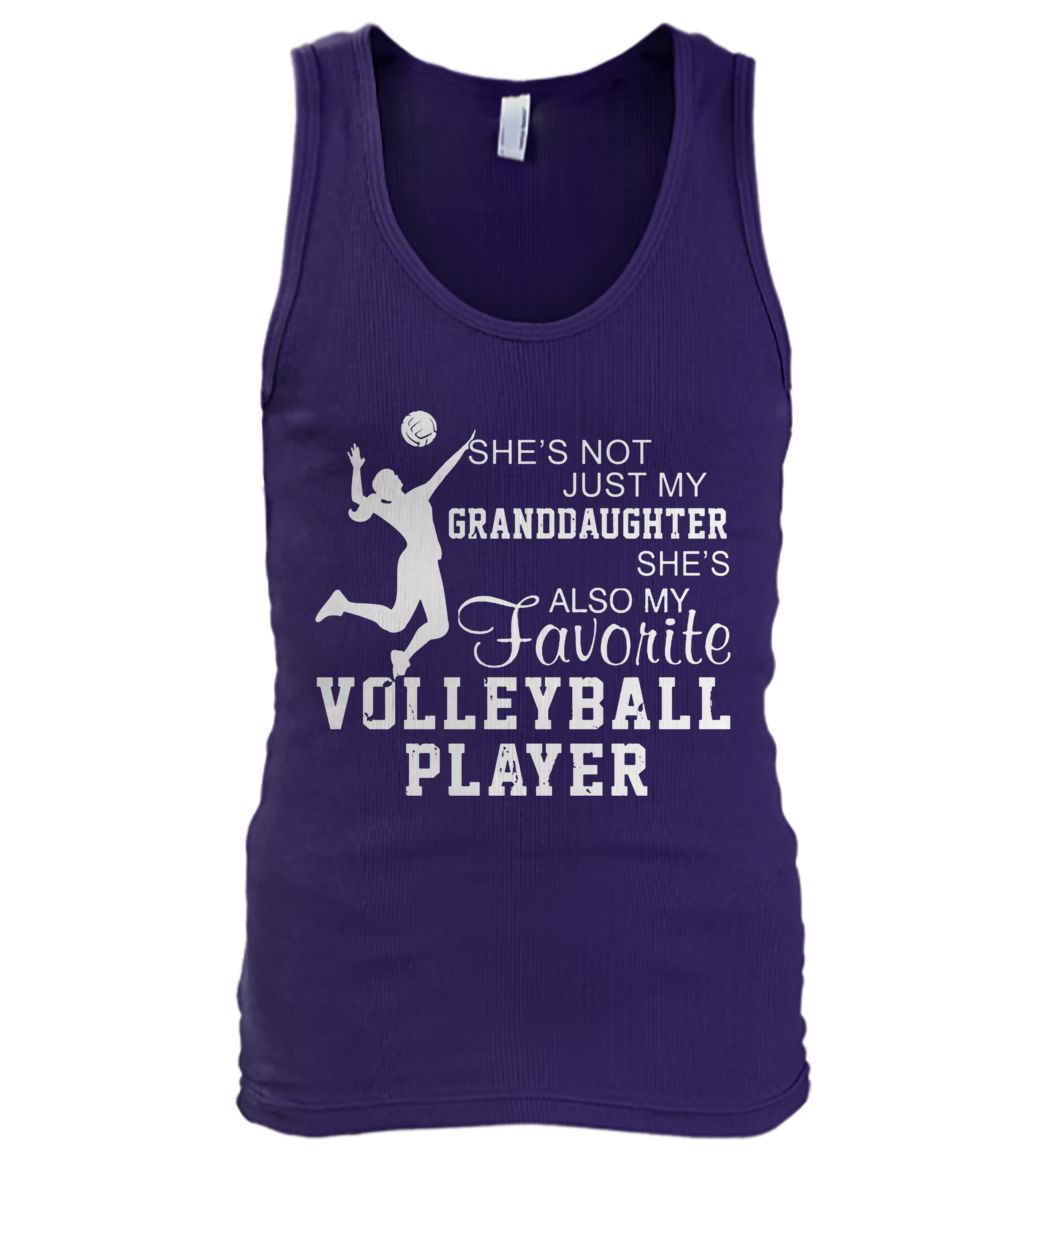 She's not just my granddaughter she's also my favorite volleyball player tank top